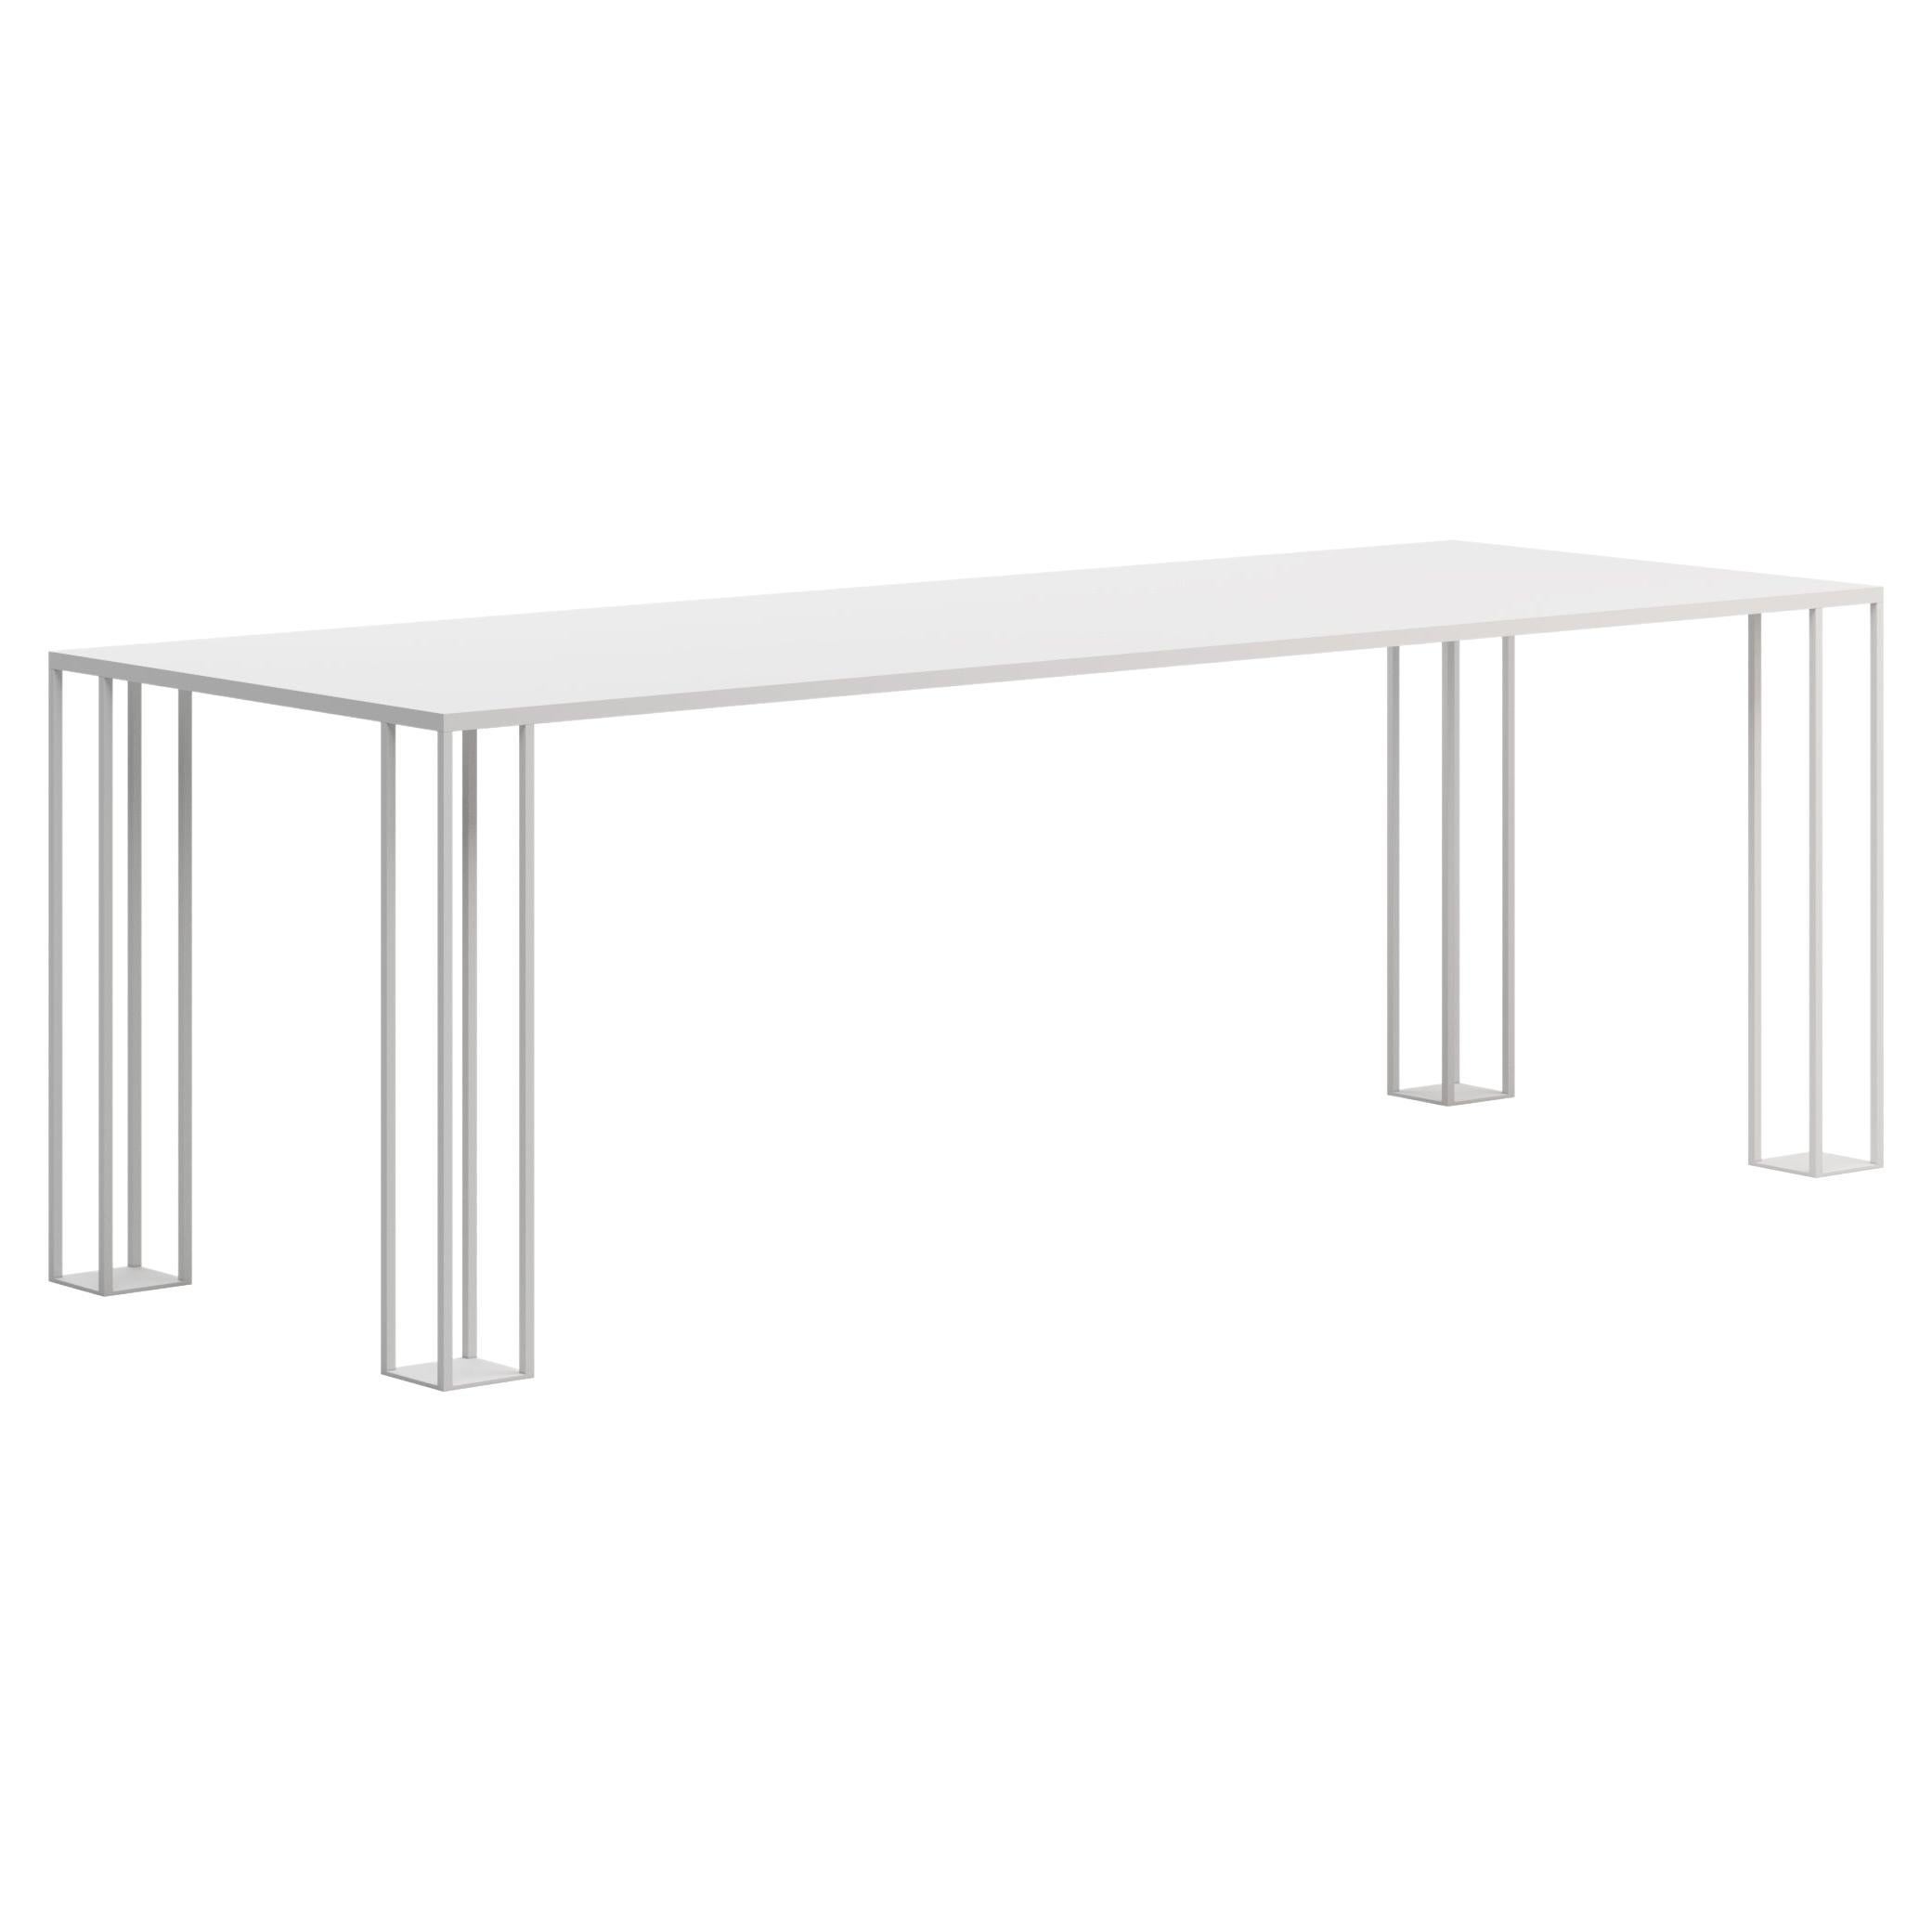 XYZ Steel Dining Table - white For Sale